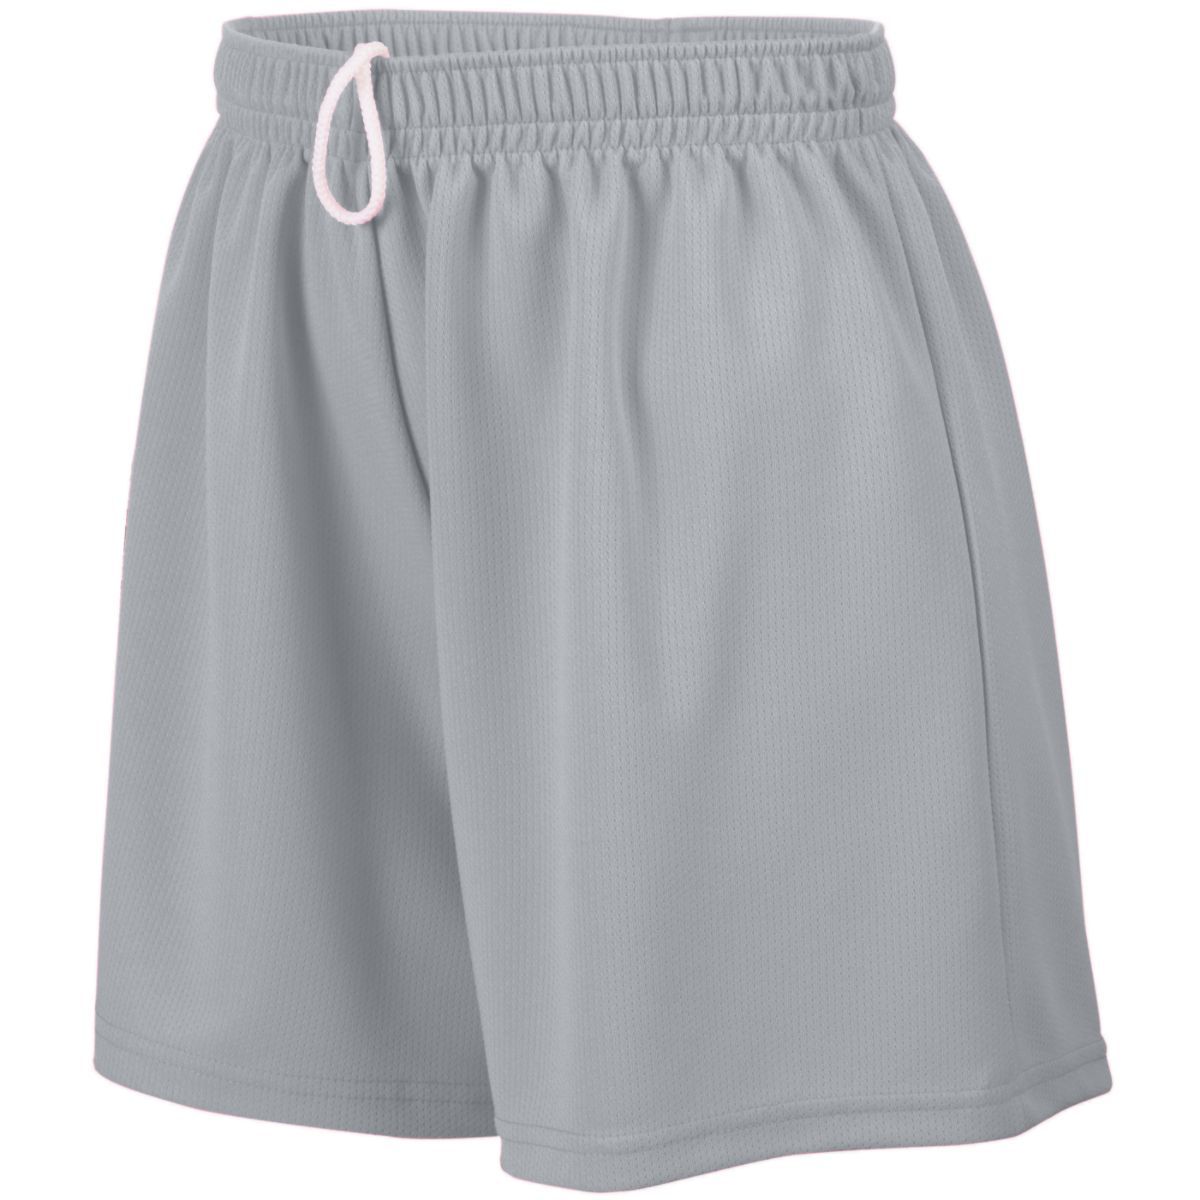 Augusta Sportswear Girls Wicking Mesh Shorts in Silver Grey  -Part of the Girls, Augusta-Products, Lacrosse, Girls-Shorts, All-Sports, All-Sports-1 product lines at KanaleyCreations.com